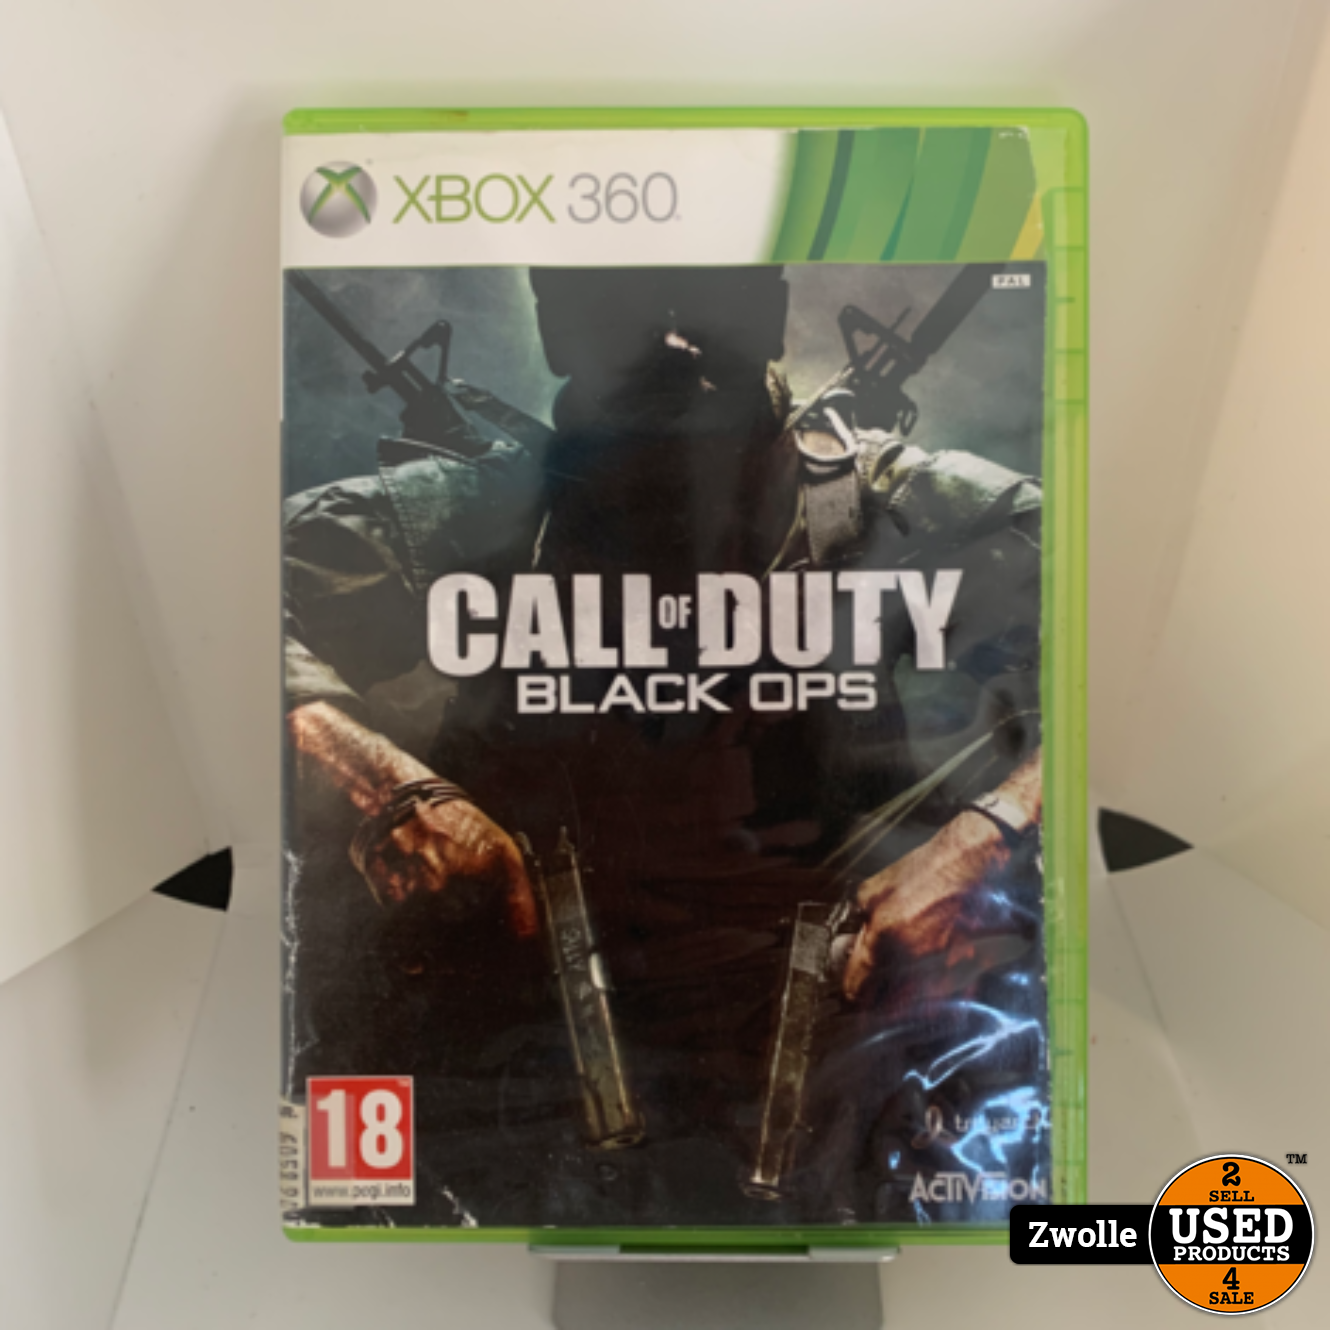 dans Bewust worden De stad Xbox One Game | Call of Duty ; Black ops - Used Products Zwolle